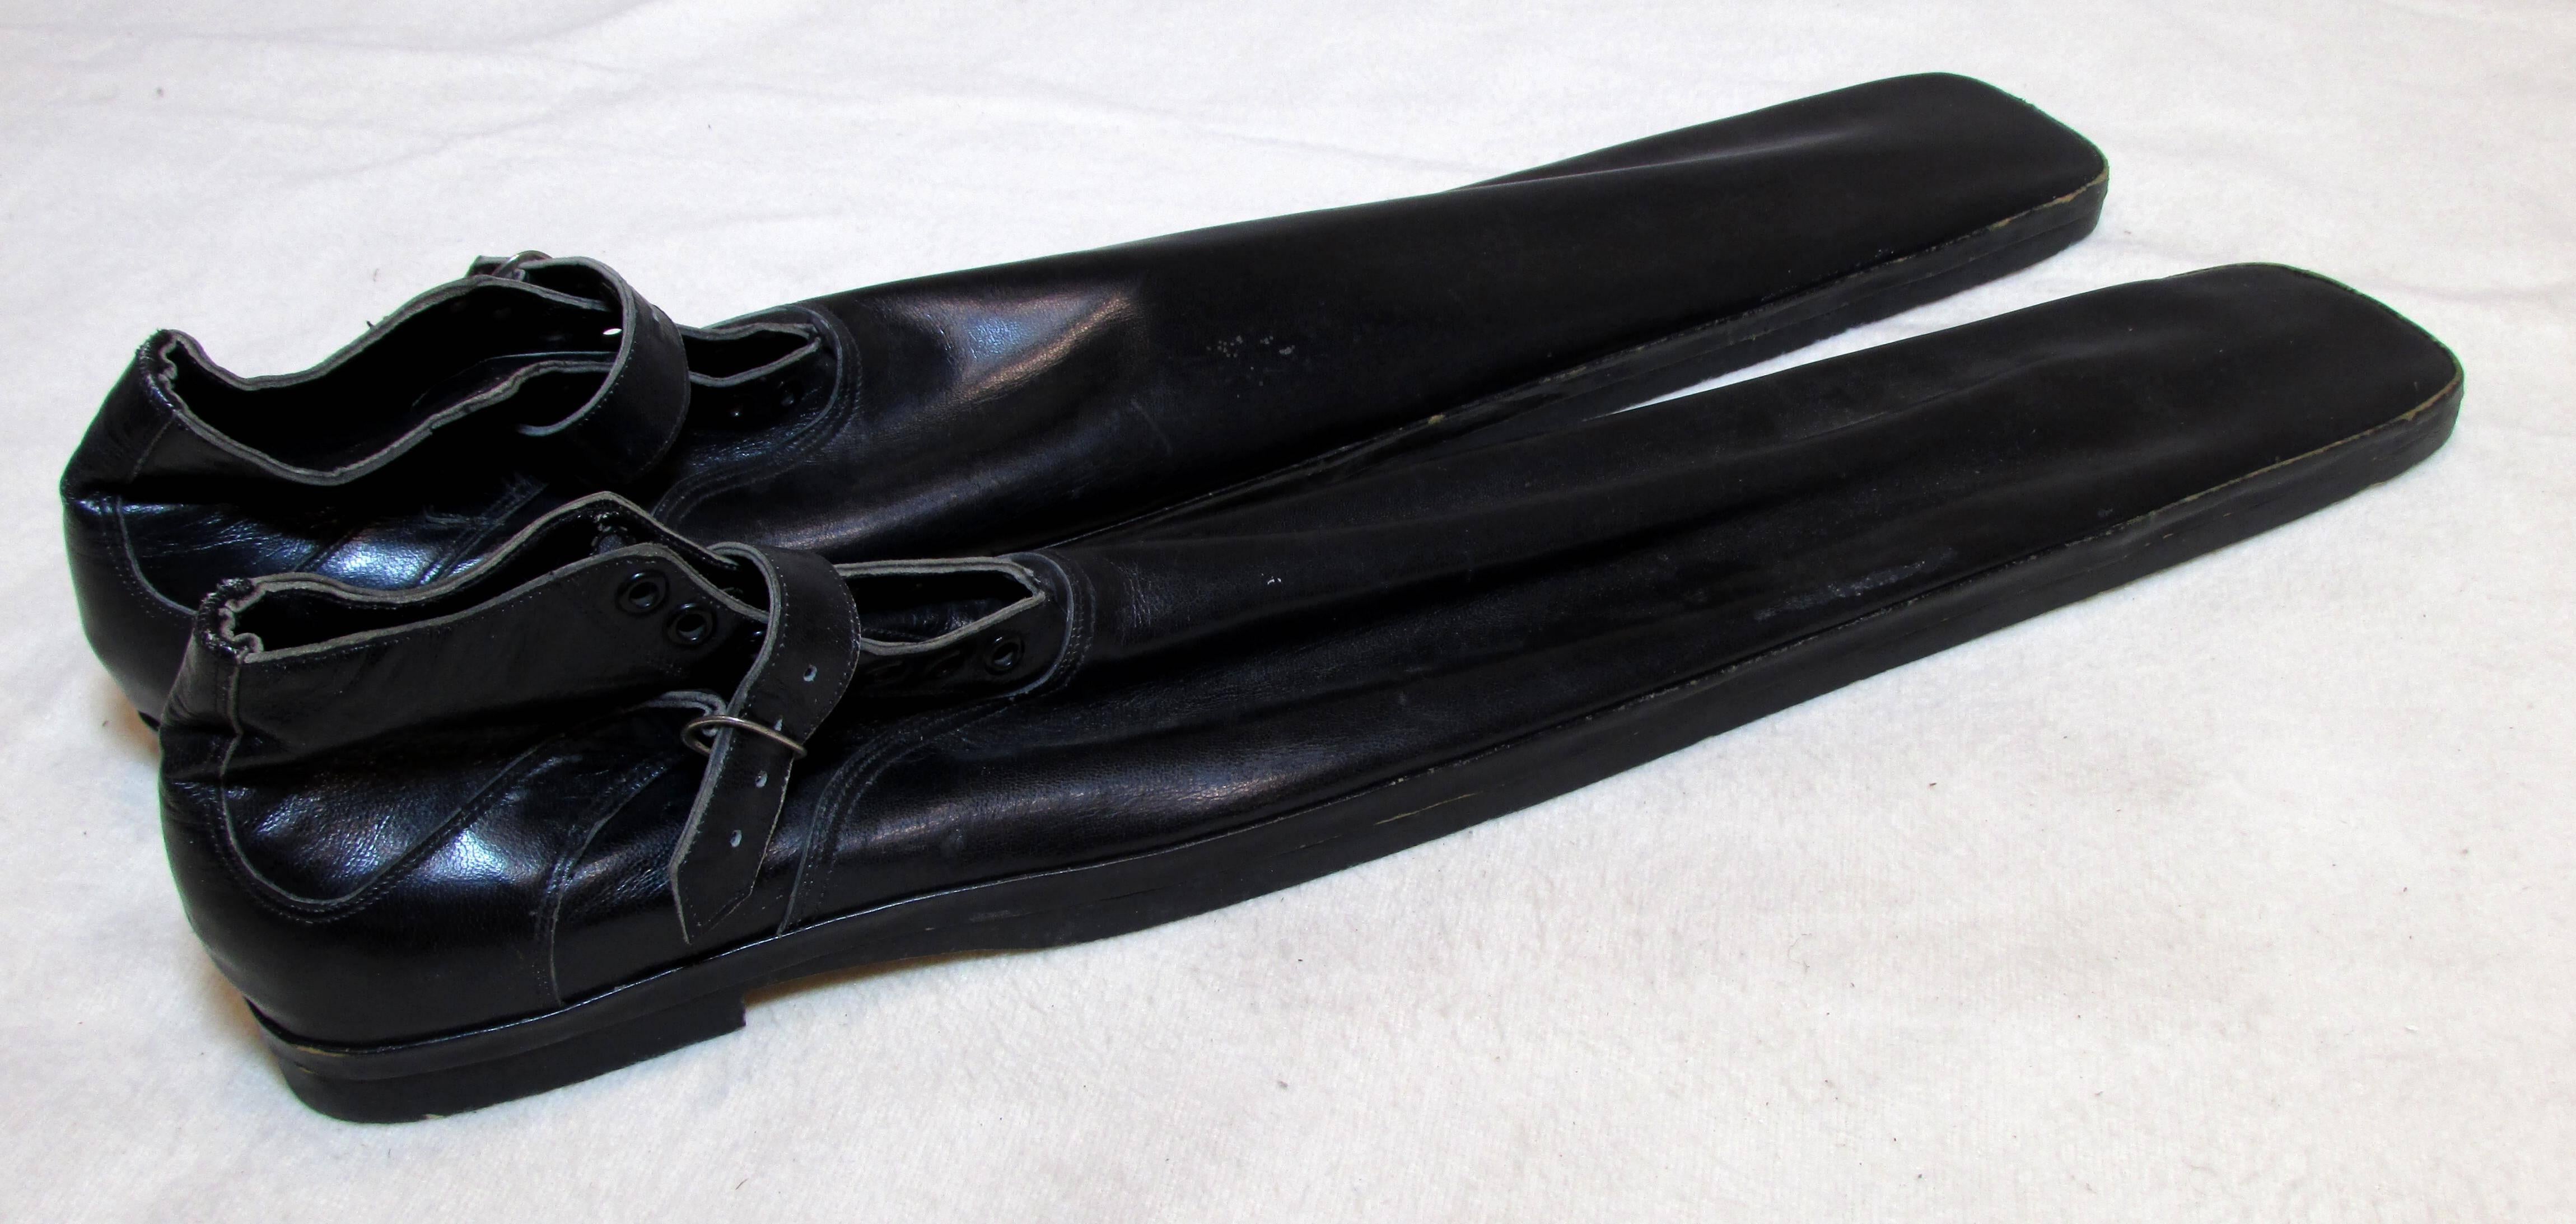 Very long pair of black leather vintage clown shoes with wooden sole this style was made famous by 